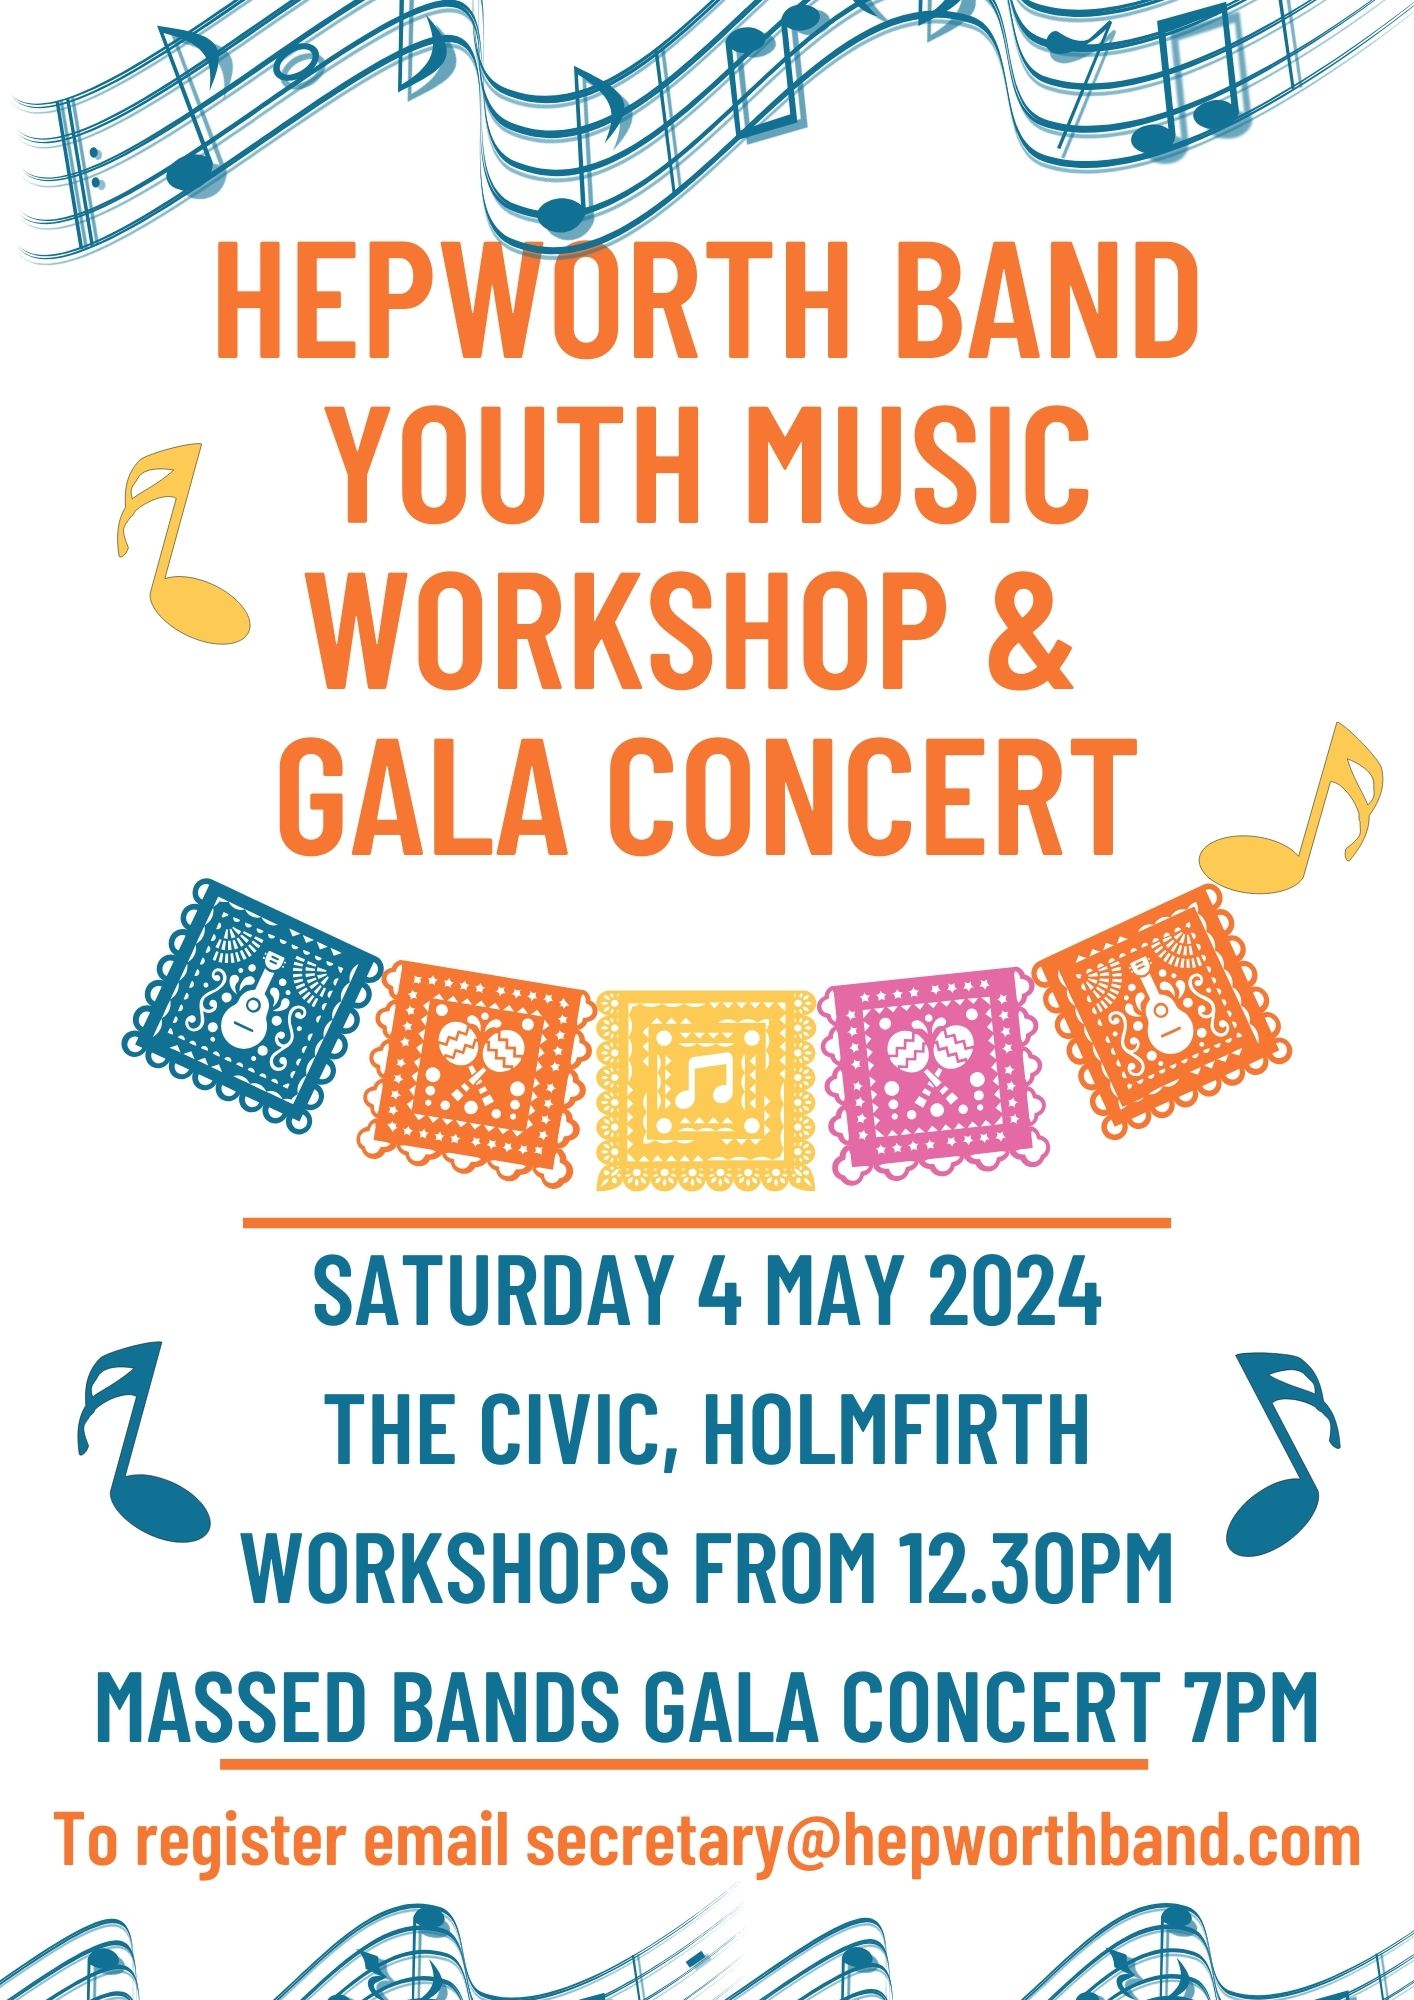 Gala Concert with Hepworth Band & HD9 Community Youth Brass